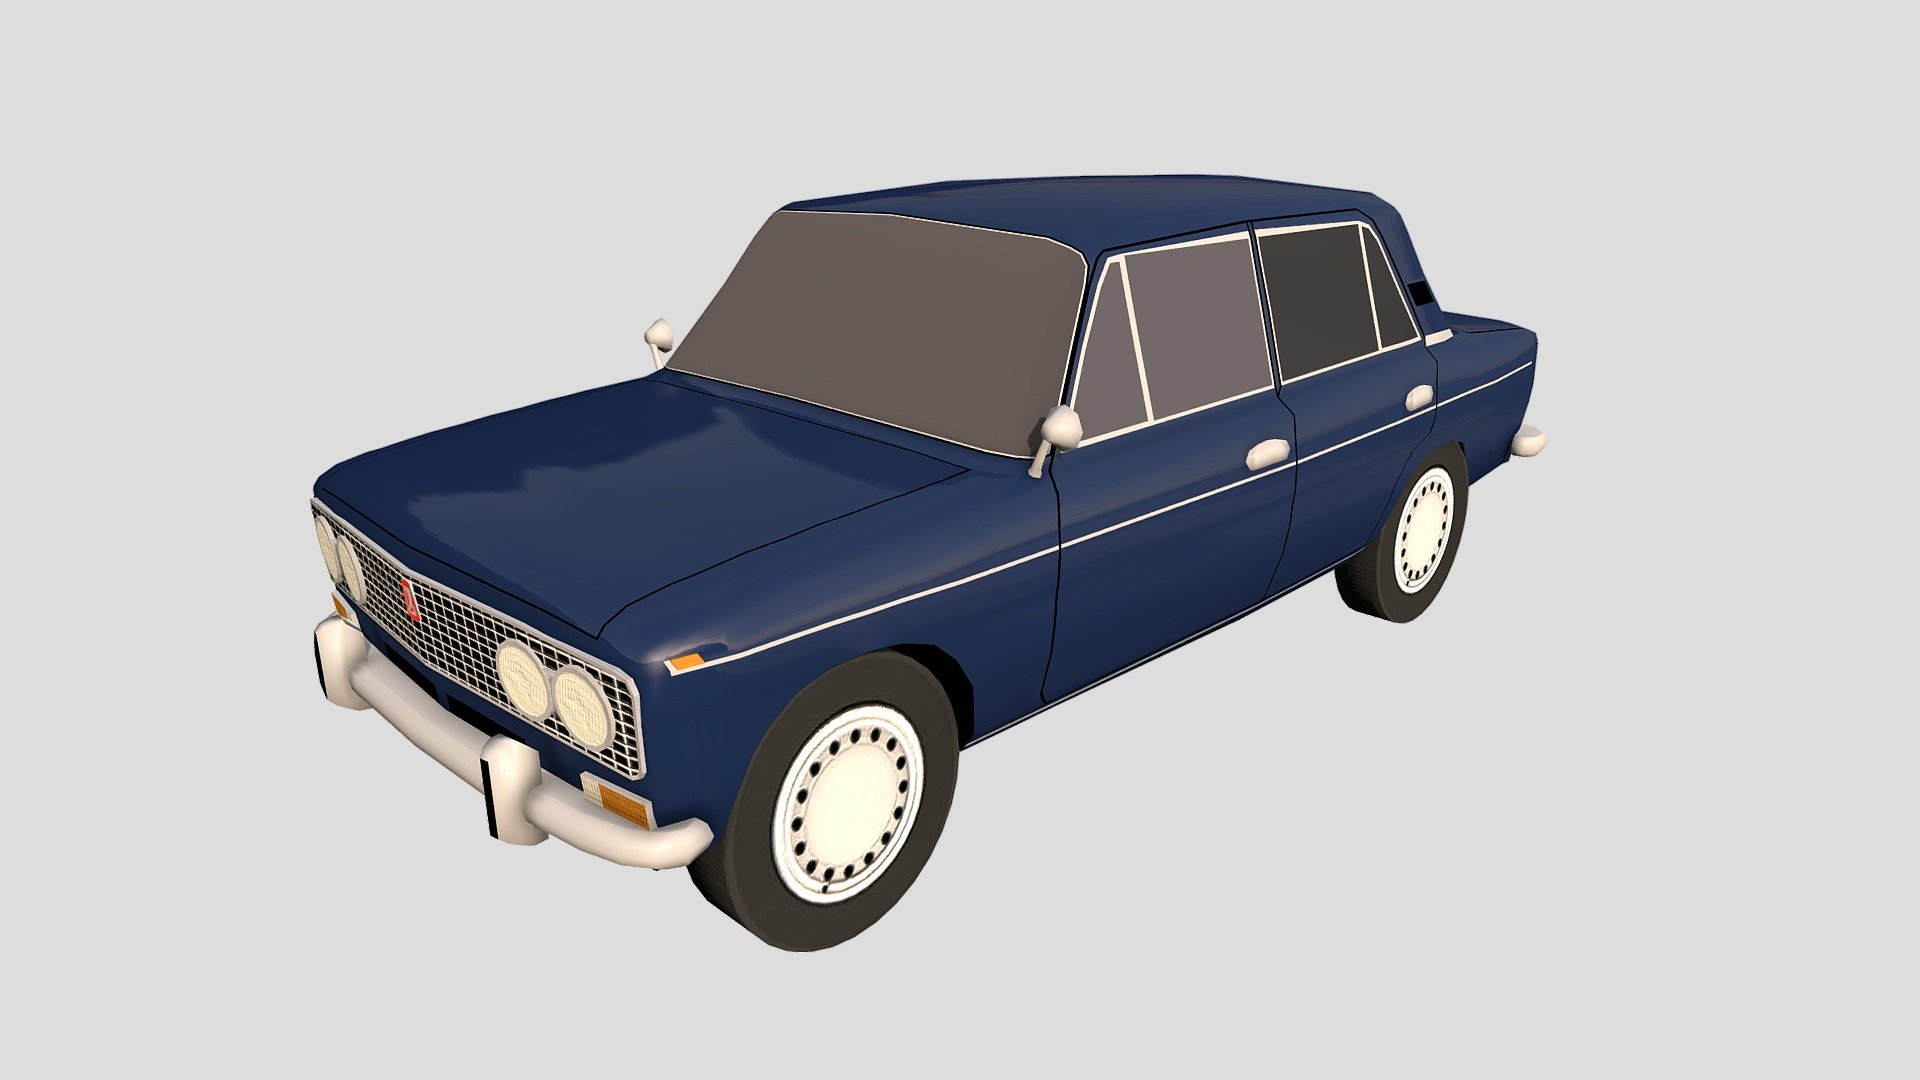 Asset for Cities Skylines. VAZ-2102 was developed at the plant VAZ in Tolyatti in 1972 - 1984. 
This car will get the name &ldquo;treshka